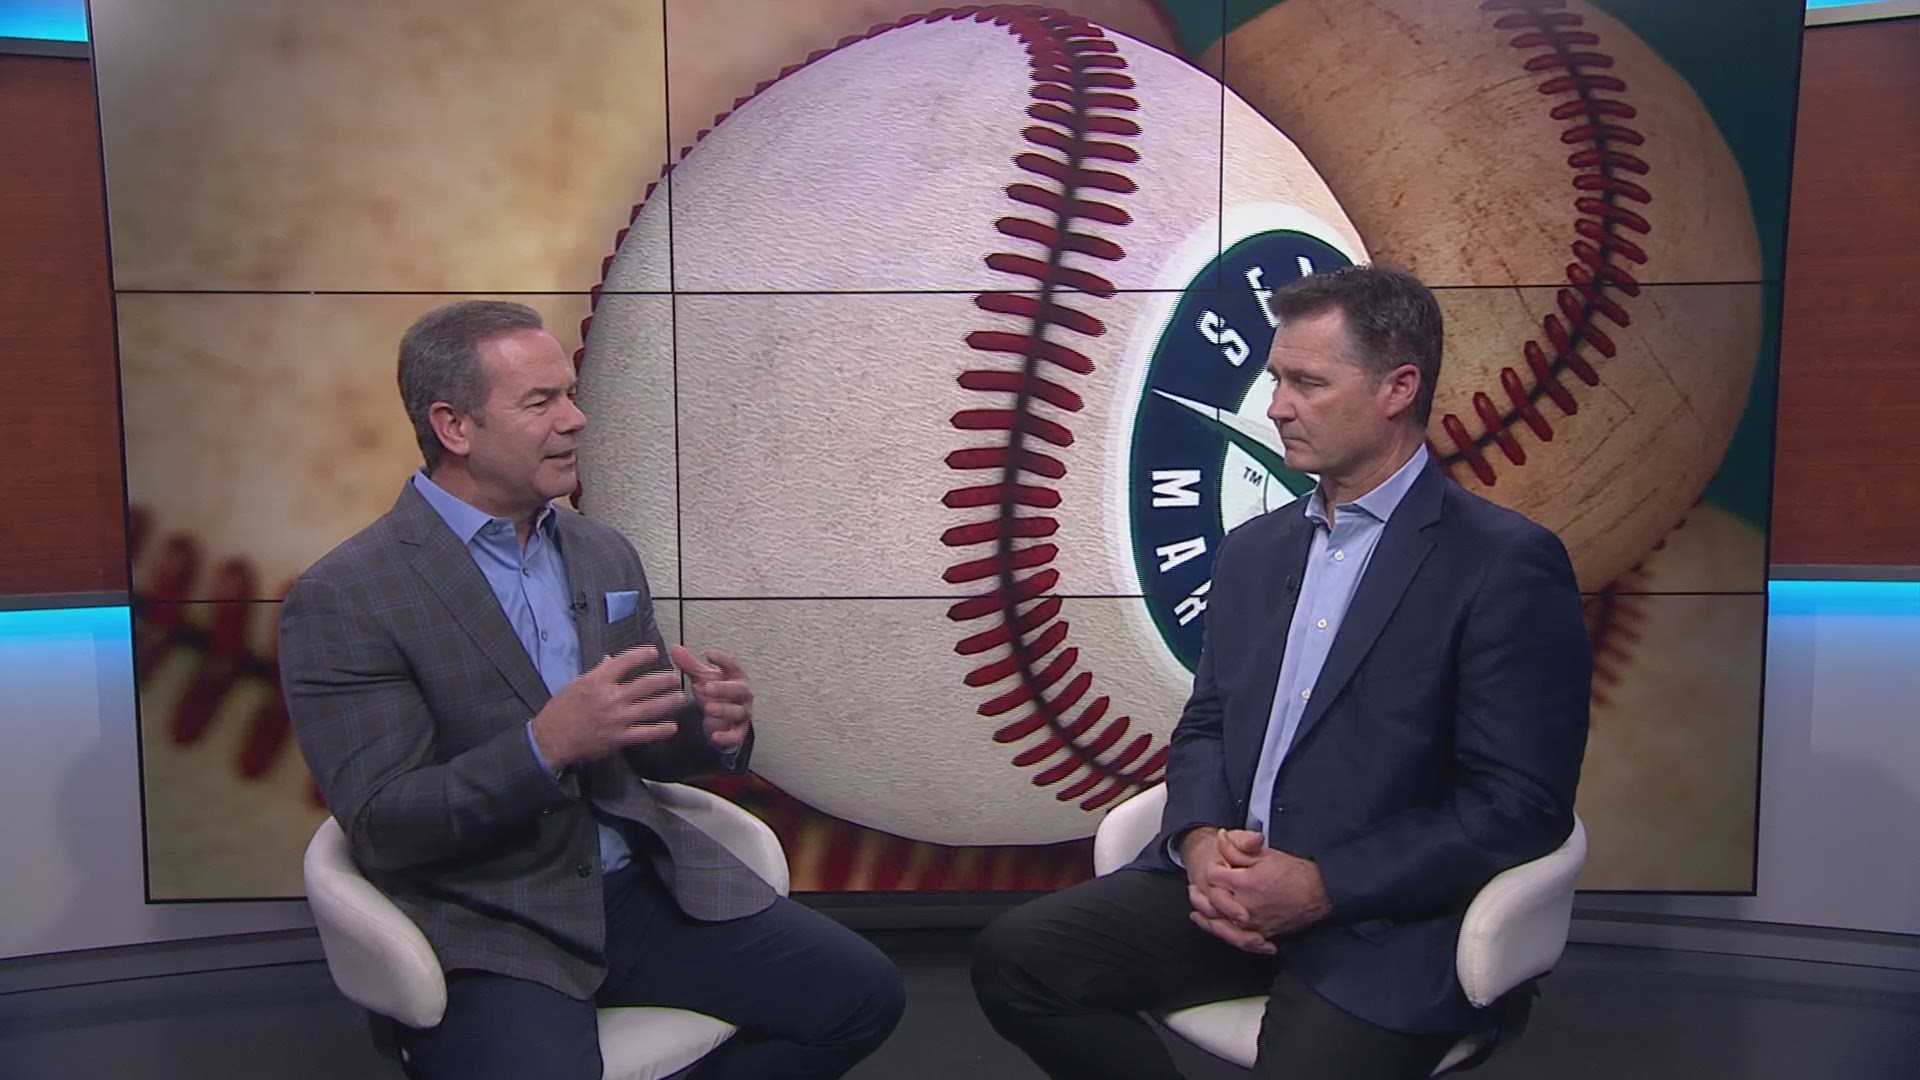 Mariners manager Scott Servais sat down with Paul Silvi in a 3-part interview to talk about the team.  In part three, Servais talks about the new guys, missing the old guys, and the collapse in second half 2018 season.